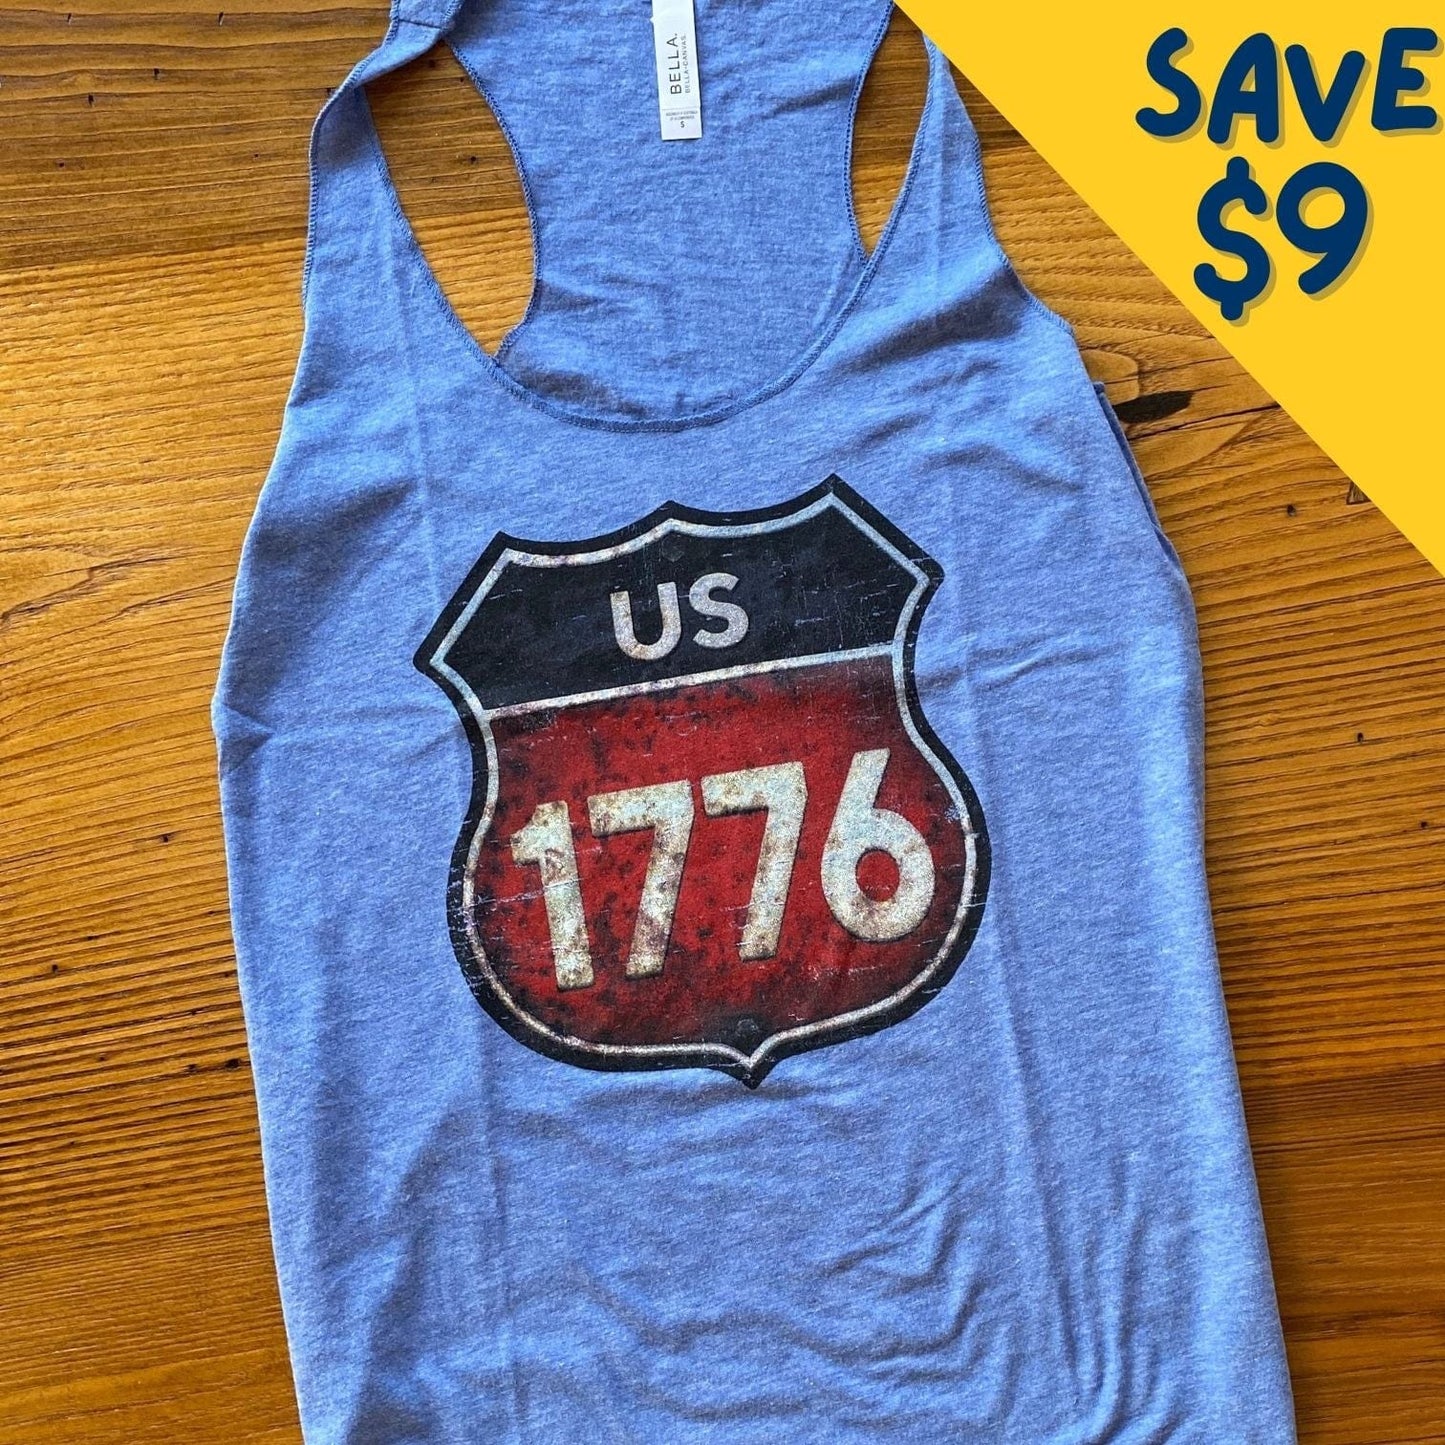 "Route 1776" Tank top for women